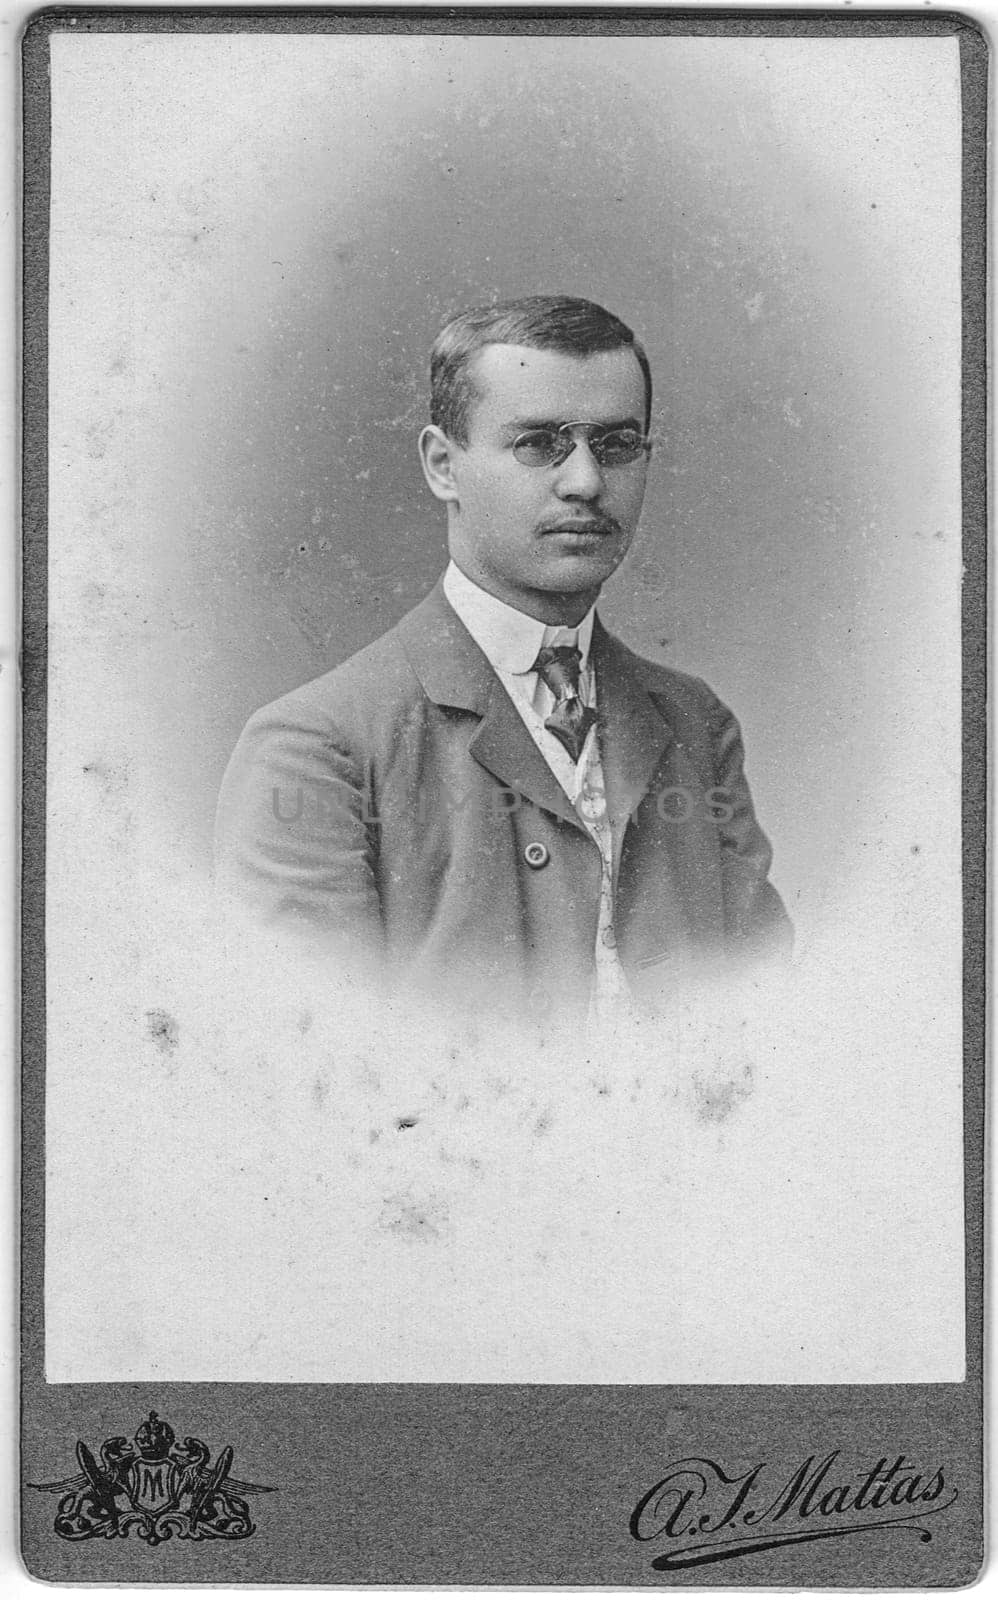 CHRUDIM, CZECHOSLOVAKIA - CIRCA 1920: Vintage cabinet card shows portrait of young man. Photo was taken in a photo studio.